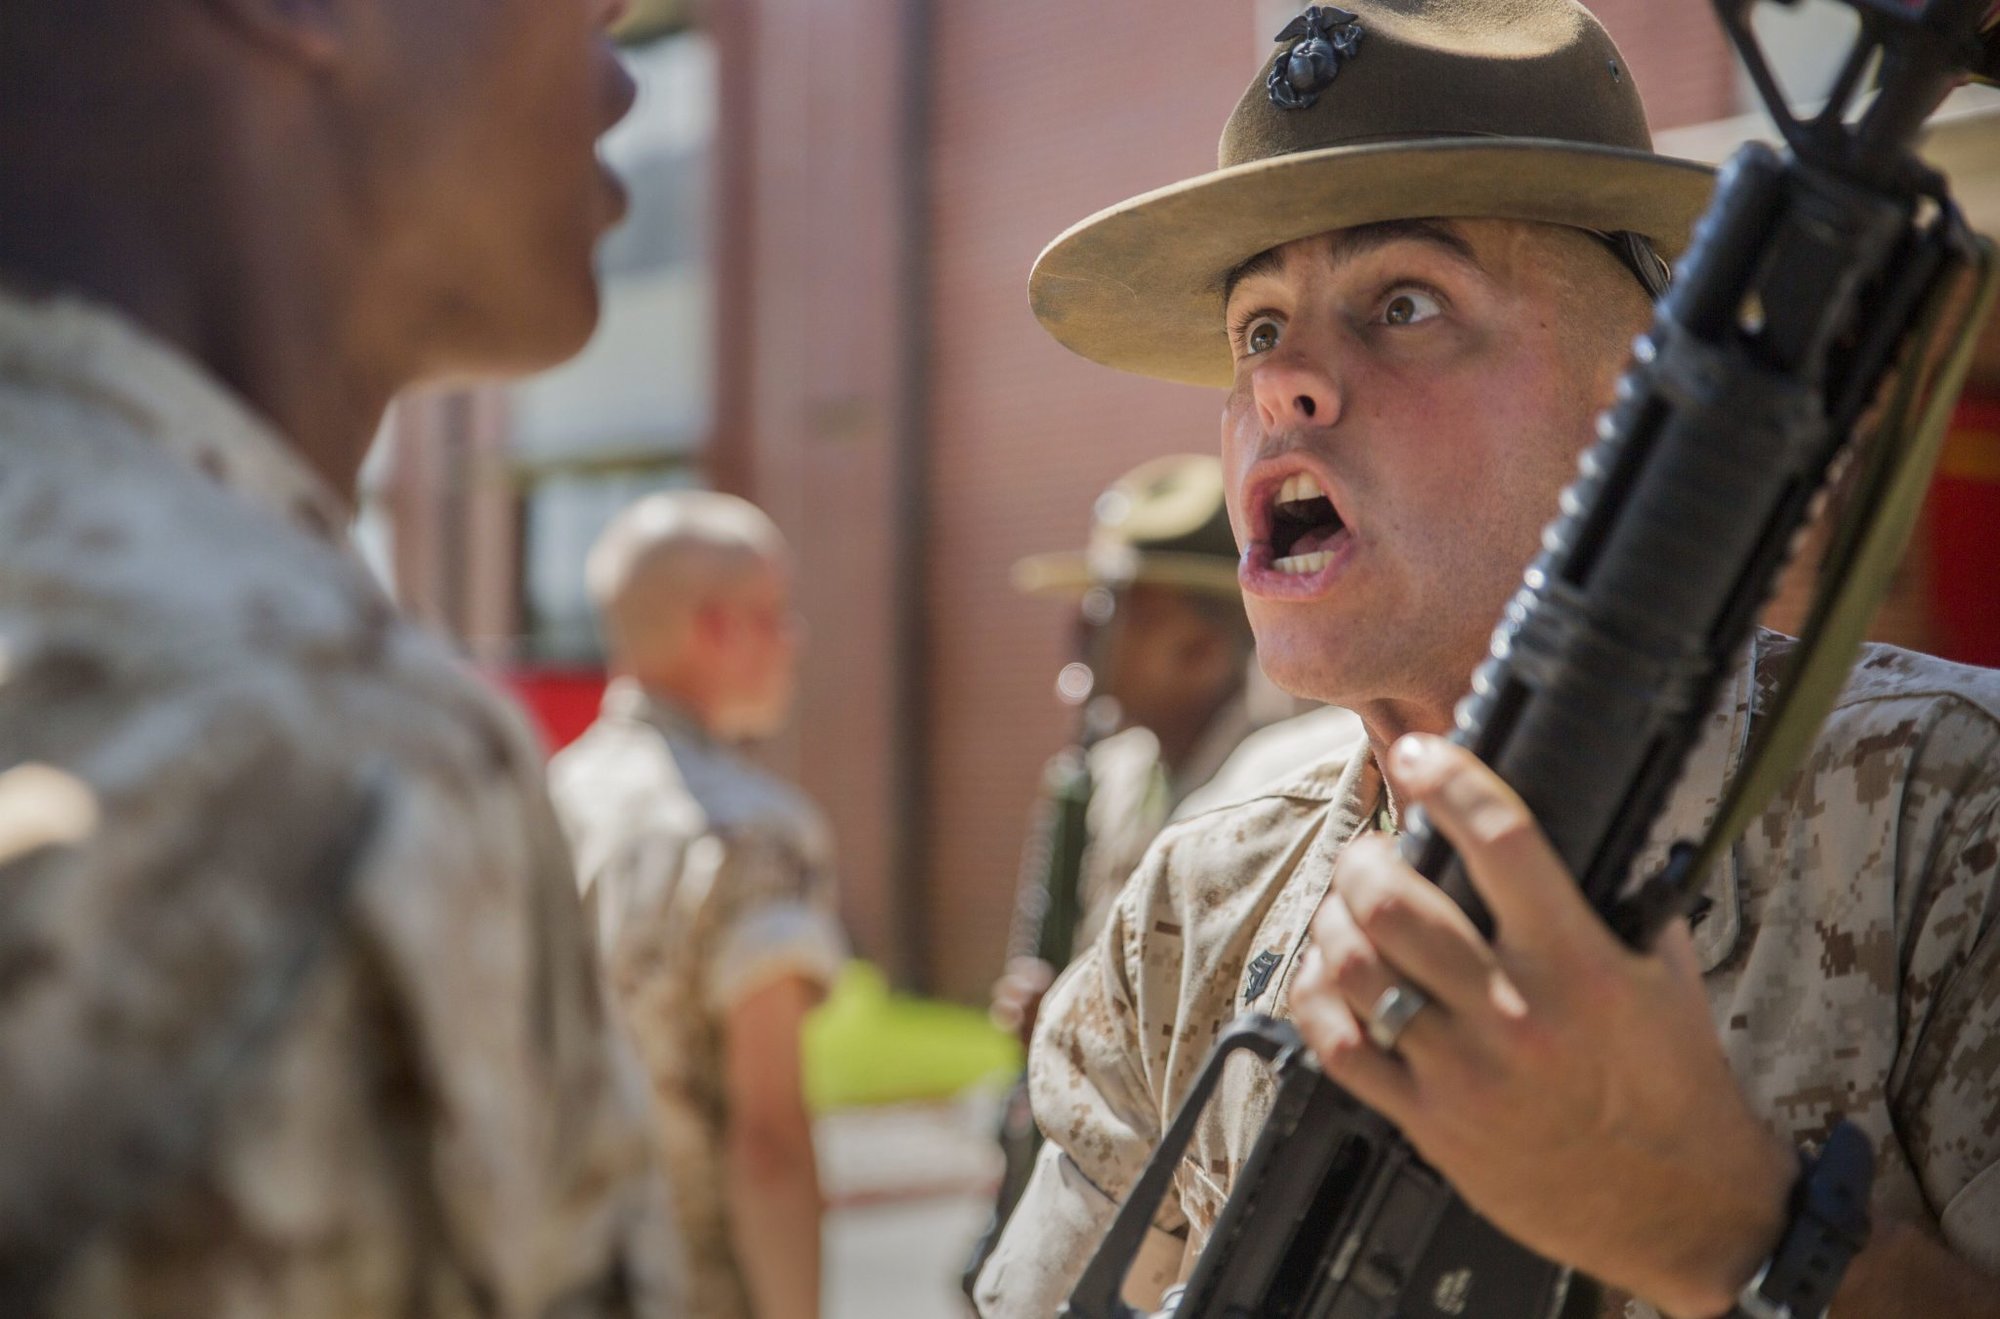 Sgt. Jonathan B. Reeves currently serves as a Marine Corps drill instructor with Platoon 1085, Charlie Company, 1st Recruit Training Battalion, at Marine Corps Recruit Depot Parris Island, S.C. Reeves joined the Marine Corps in September 2009 and became a drill instructor in January 2015. Reeves is a native of Augusta, Ga. About 600 Marine Corps drill instructors shape the approximately 20,000 recruits who come to Parris Island annually into basic United States Marines. Parris Island is home to entry-level enlisted training for 50 percent of males and 100 percent of females in the Marine Corps. (Photo by Pfc Aaron Bolser)